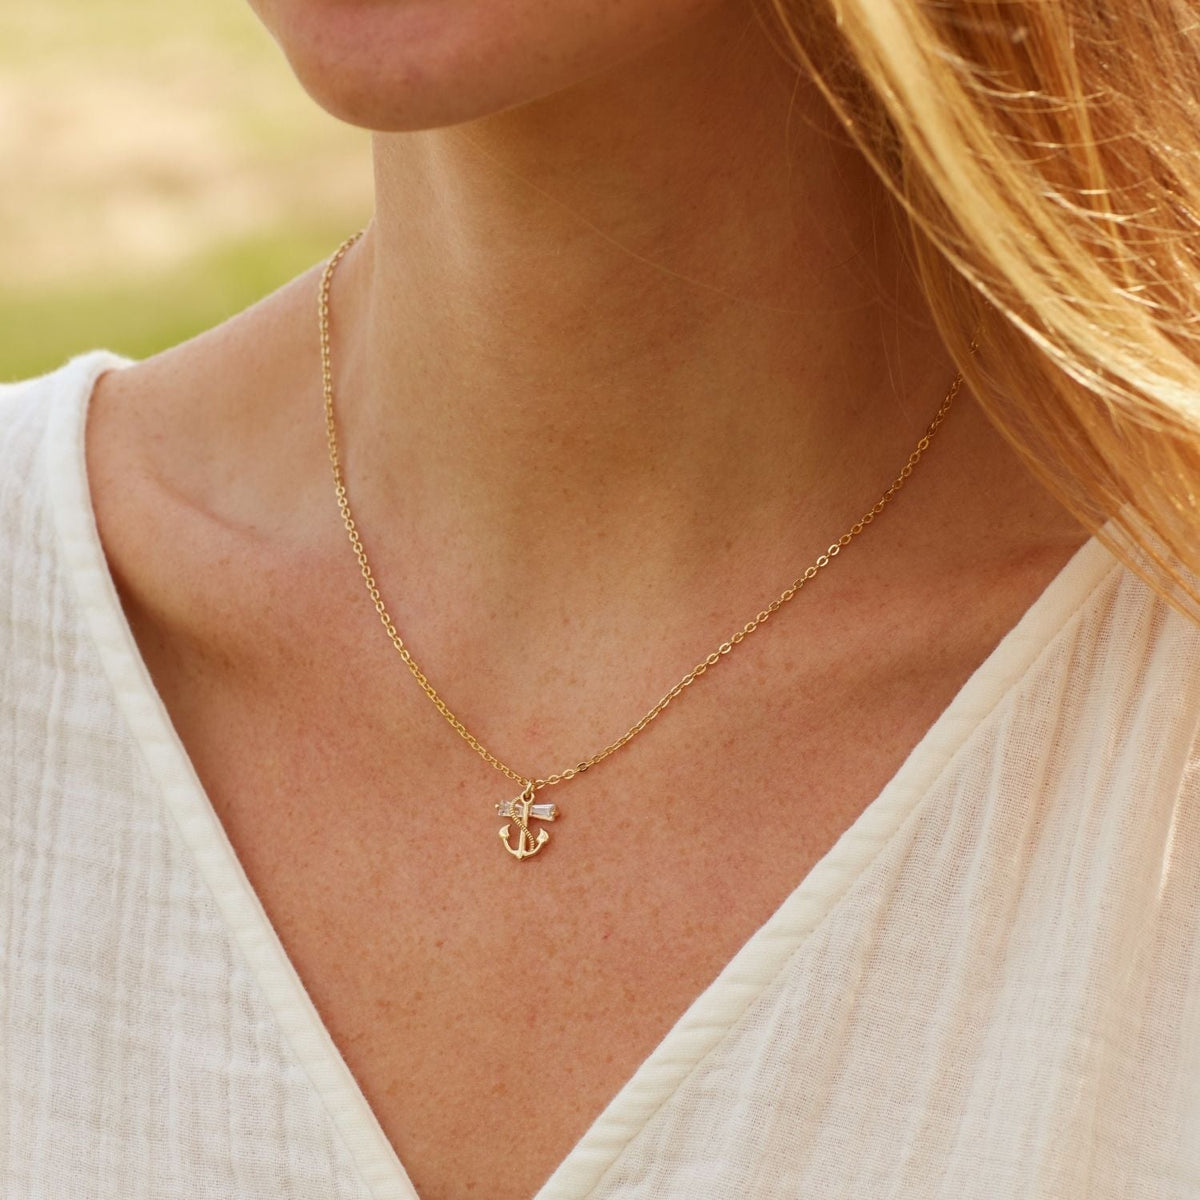 True Friendship | Grateful God Brought You Into My Life | Anchor Necklace